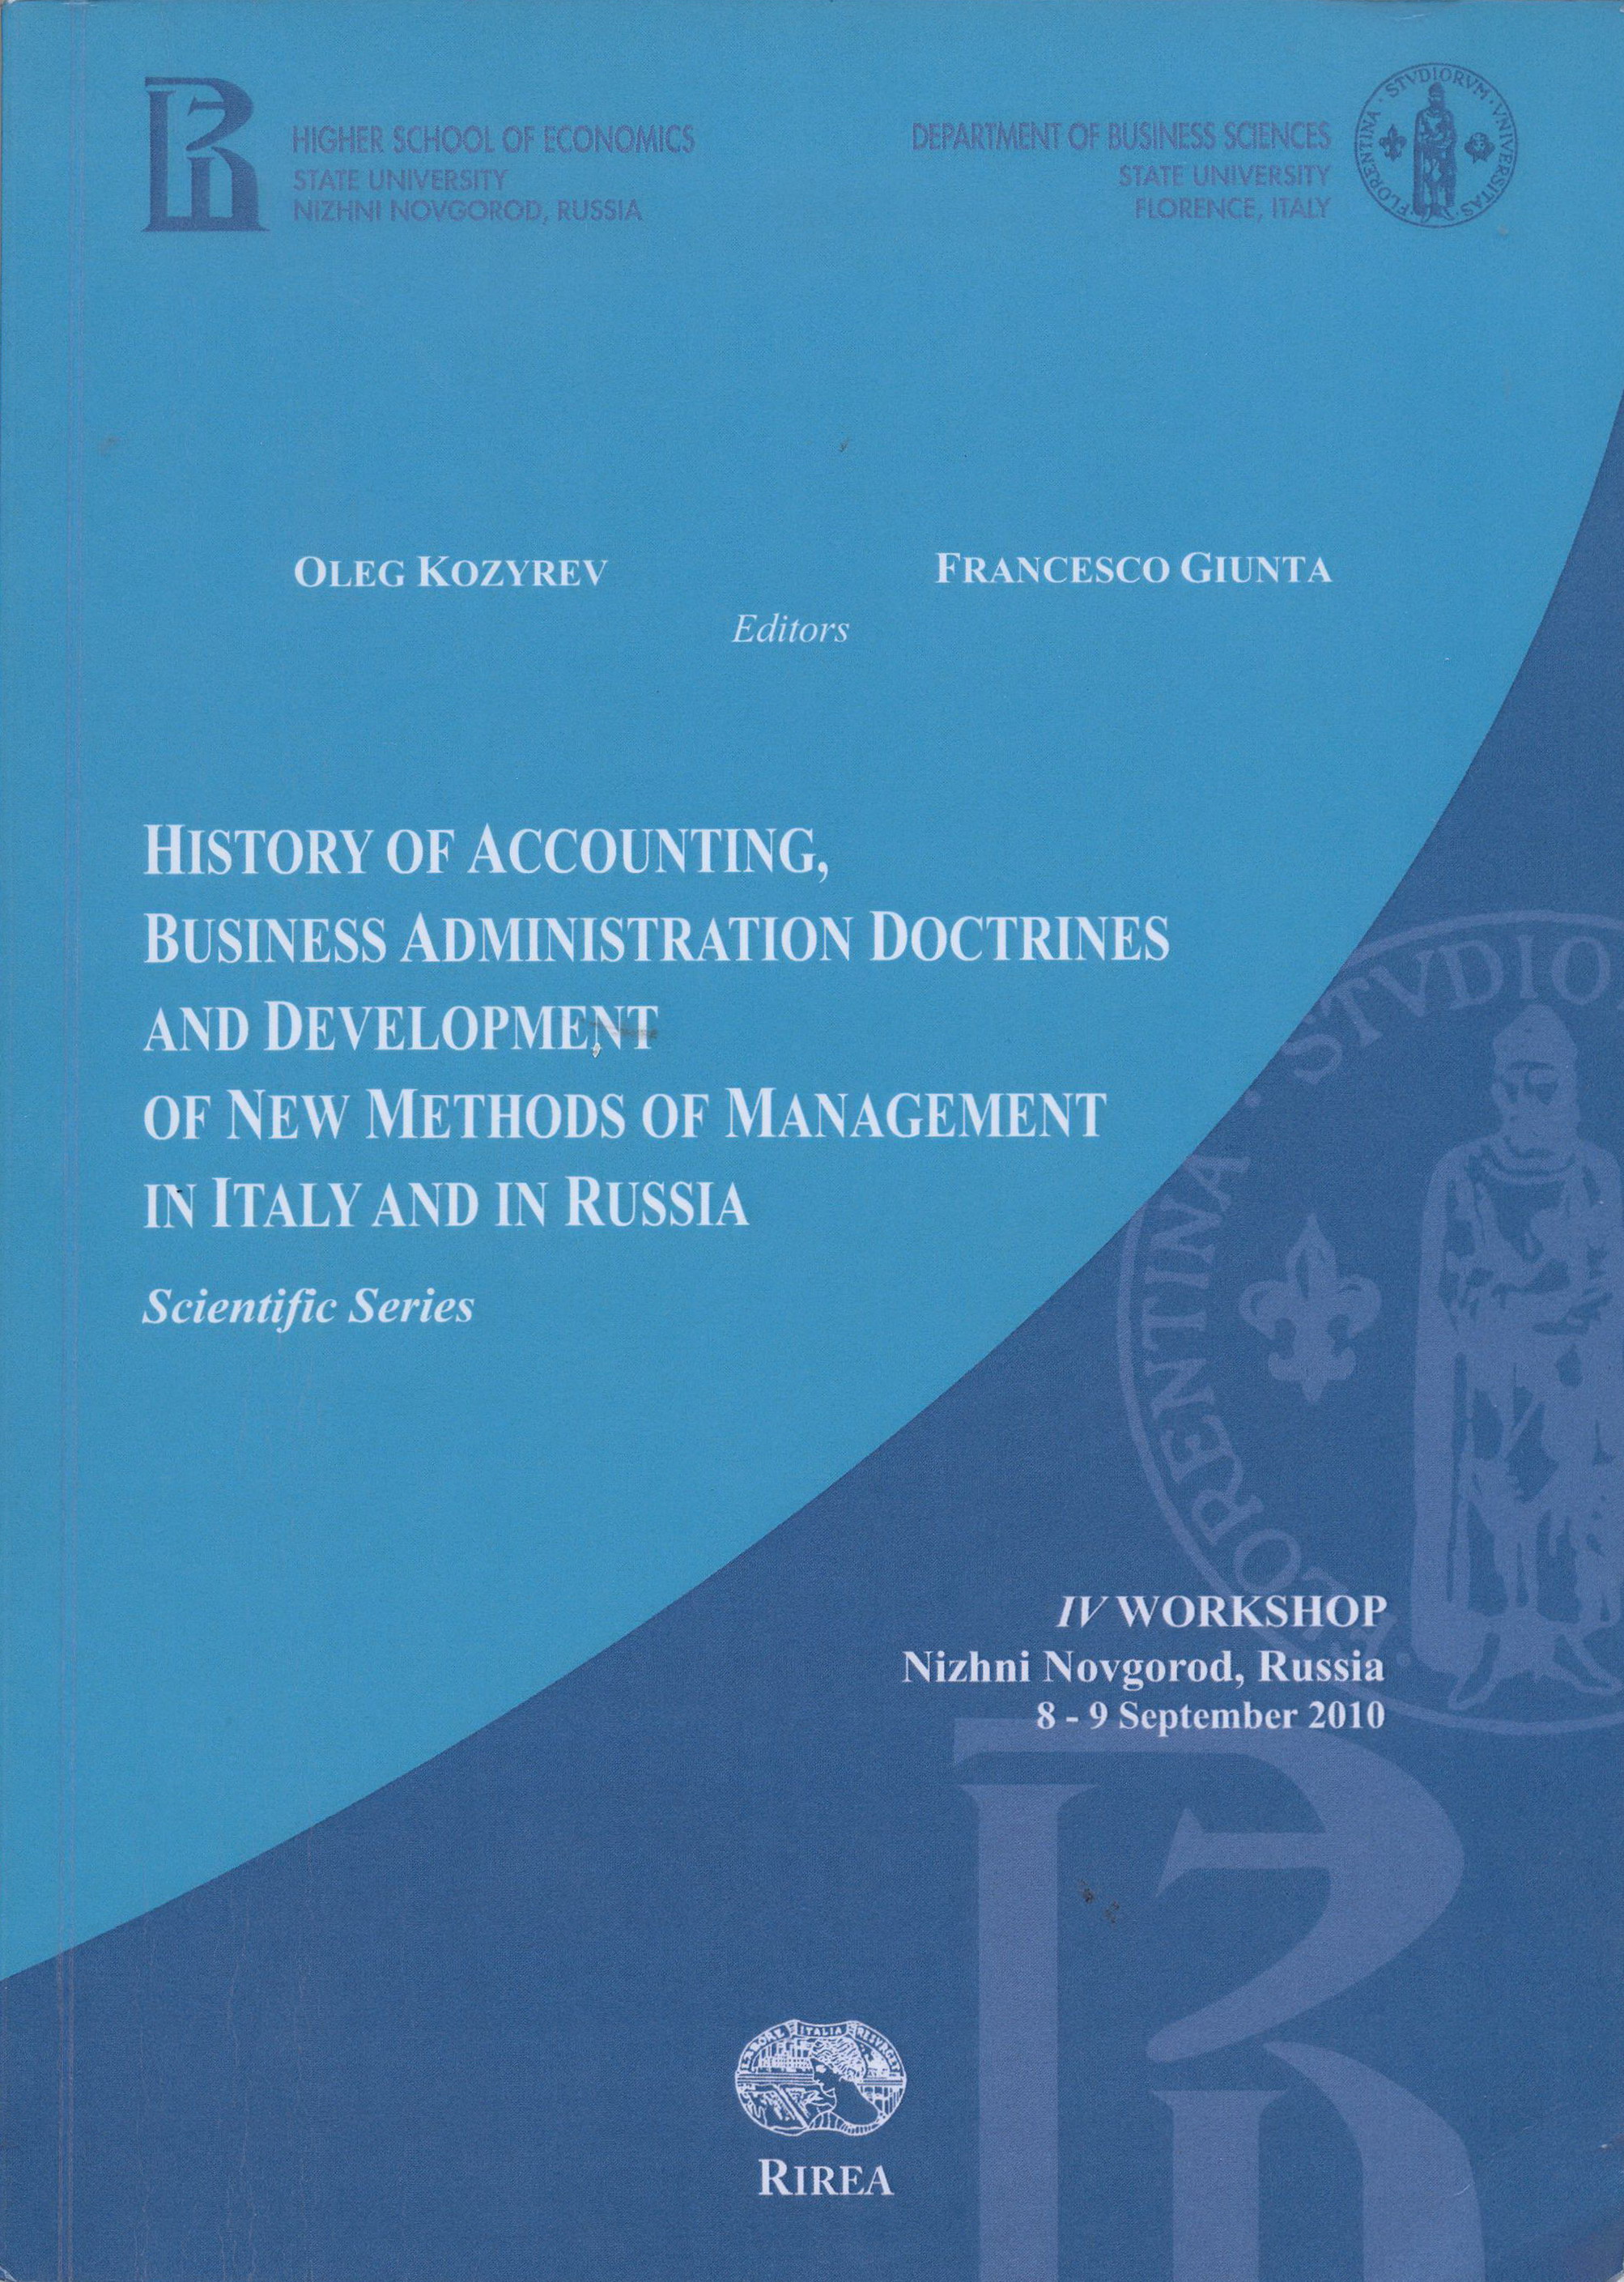 History of accounting, business administration doctrines and development of new methods of management in Italy and Russia, 2011